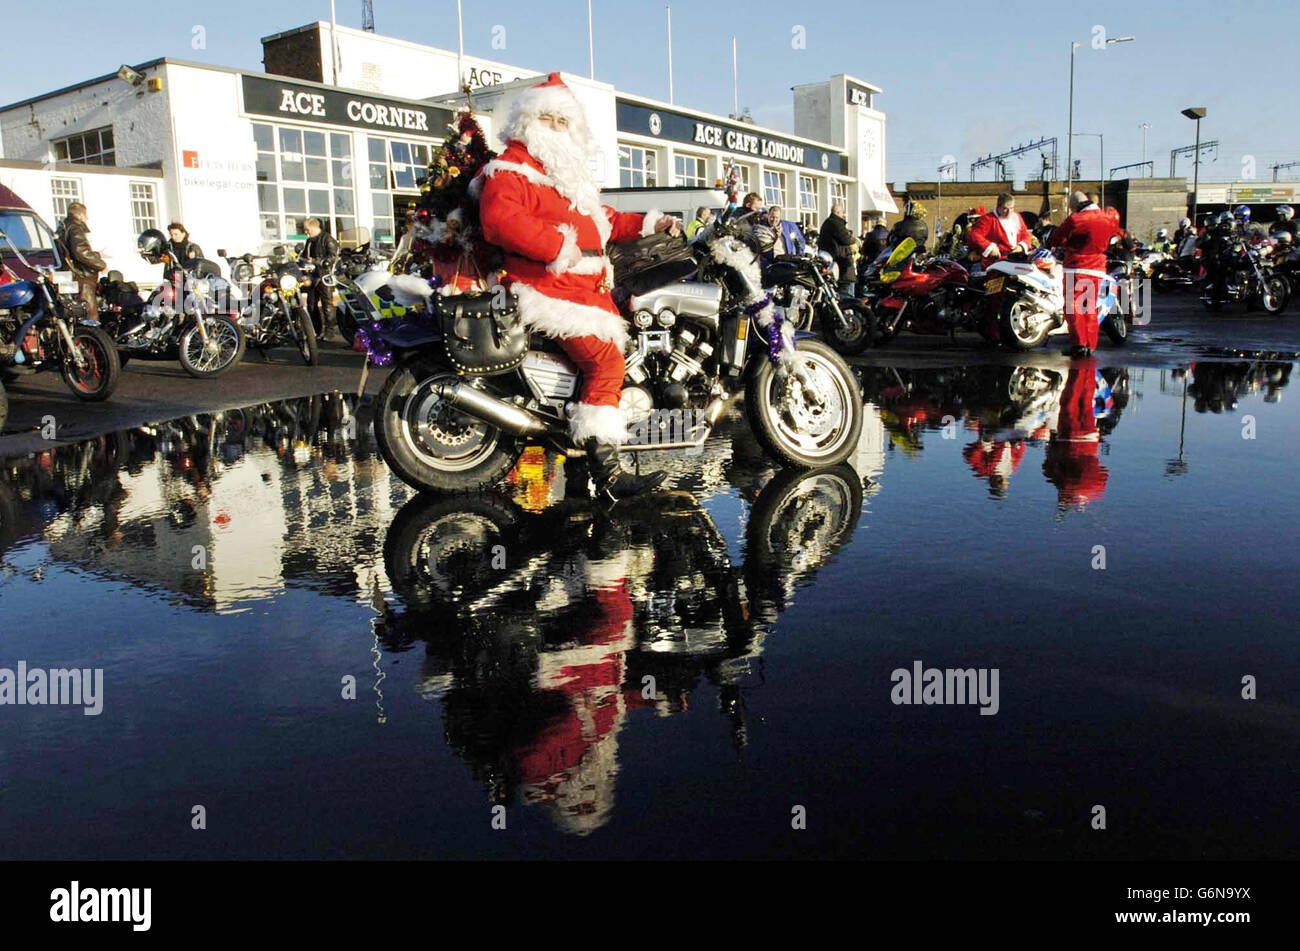 A biker dressed in Santa Claus outfit joins over a hundred motorcyclists at the Ace Cafe, Brent, north London, to deliver Christmas presents to children at Central Middlesex Hospital, St Mary's Hospital and St Thomas' Hospital. Stock Photo